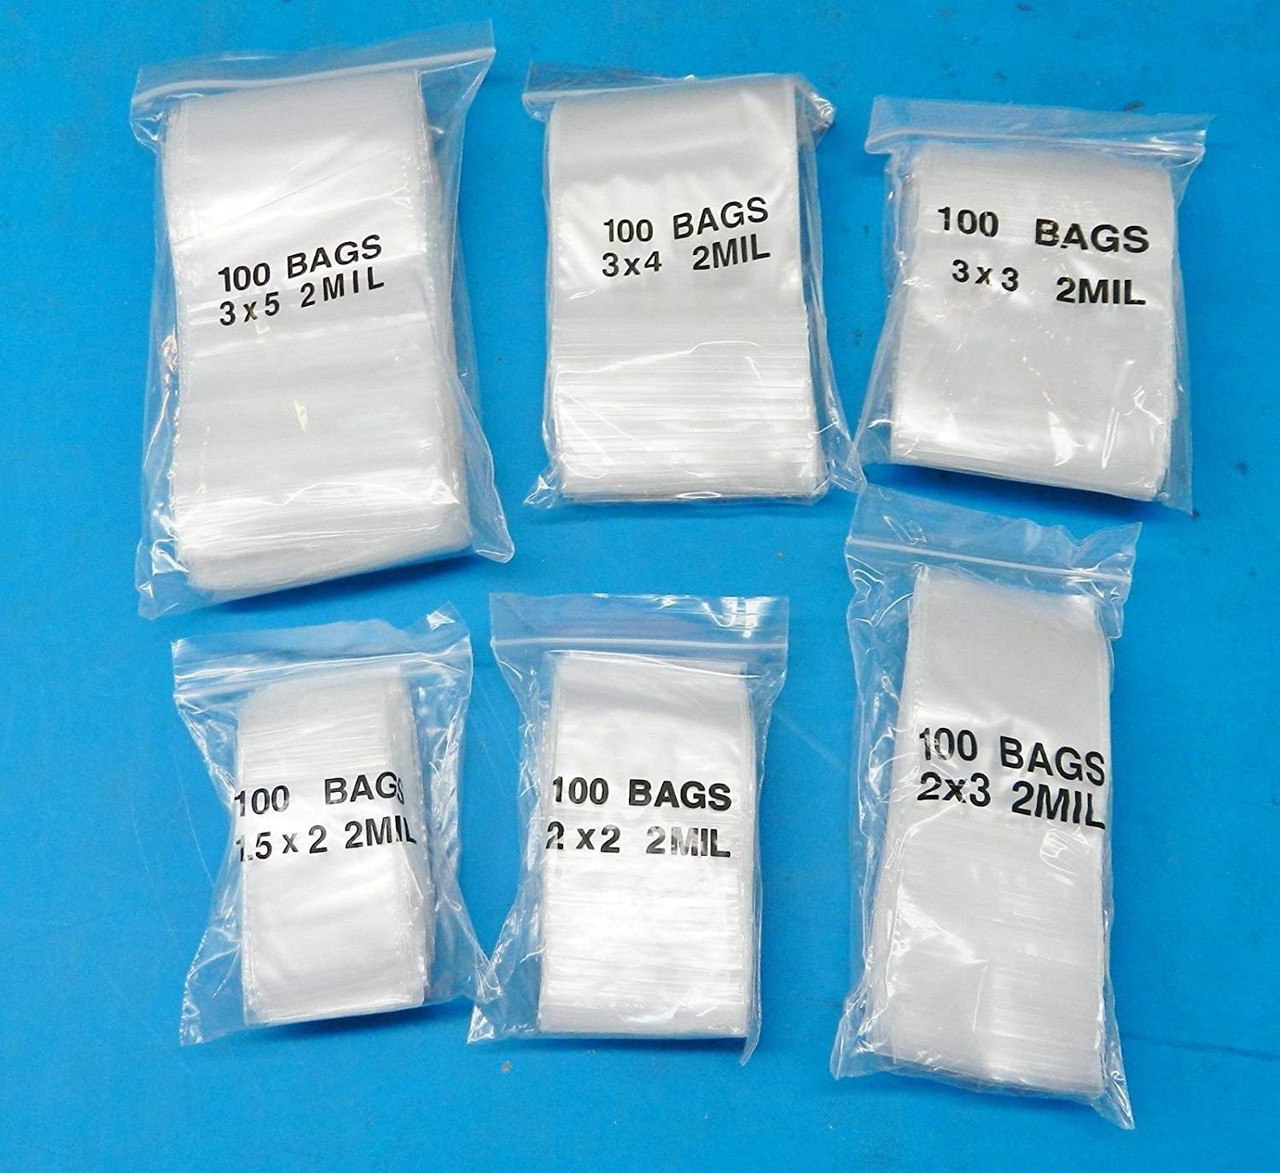 600 Reclosable Bags 6 Assorted Sizes Clear 2MIL baggies1.5x2 2x2 2x3 3x3 3x4 3x5